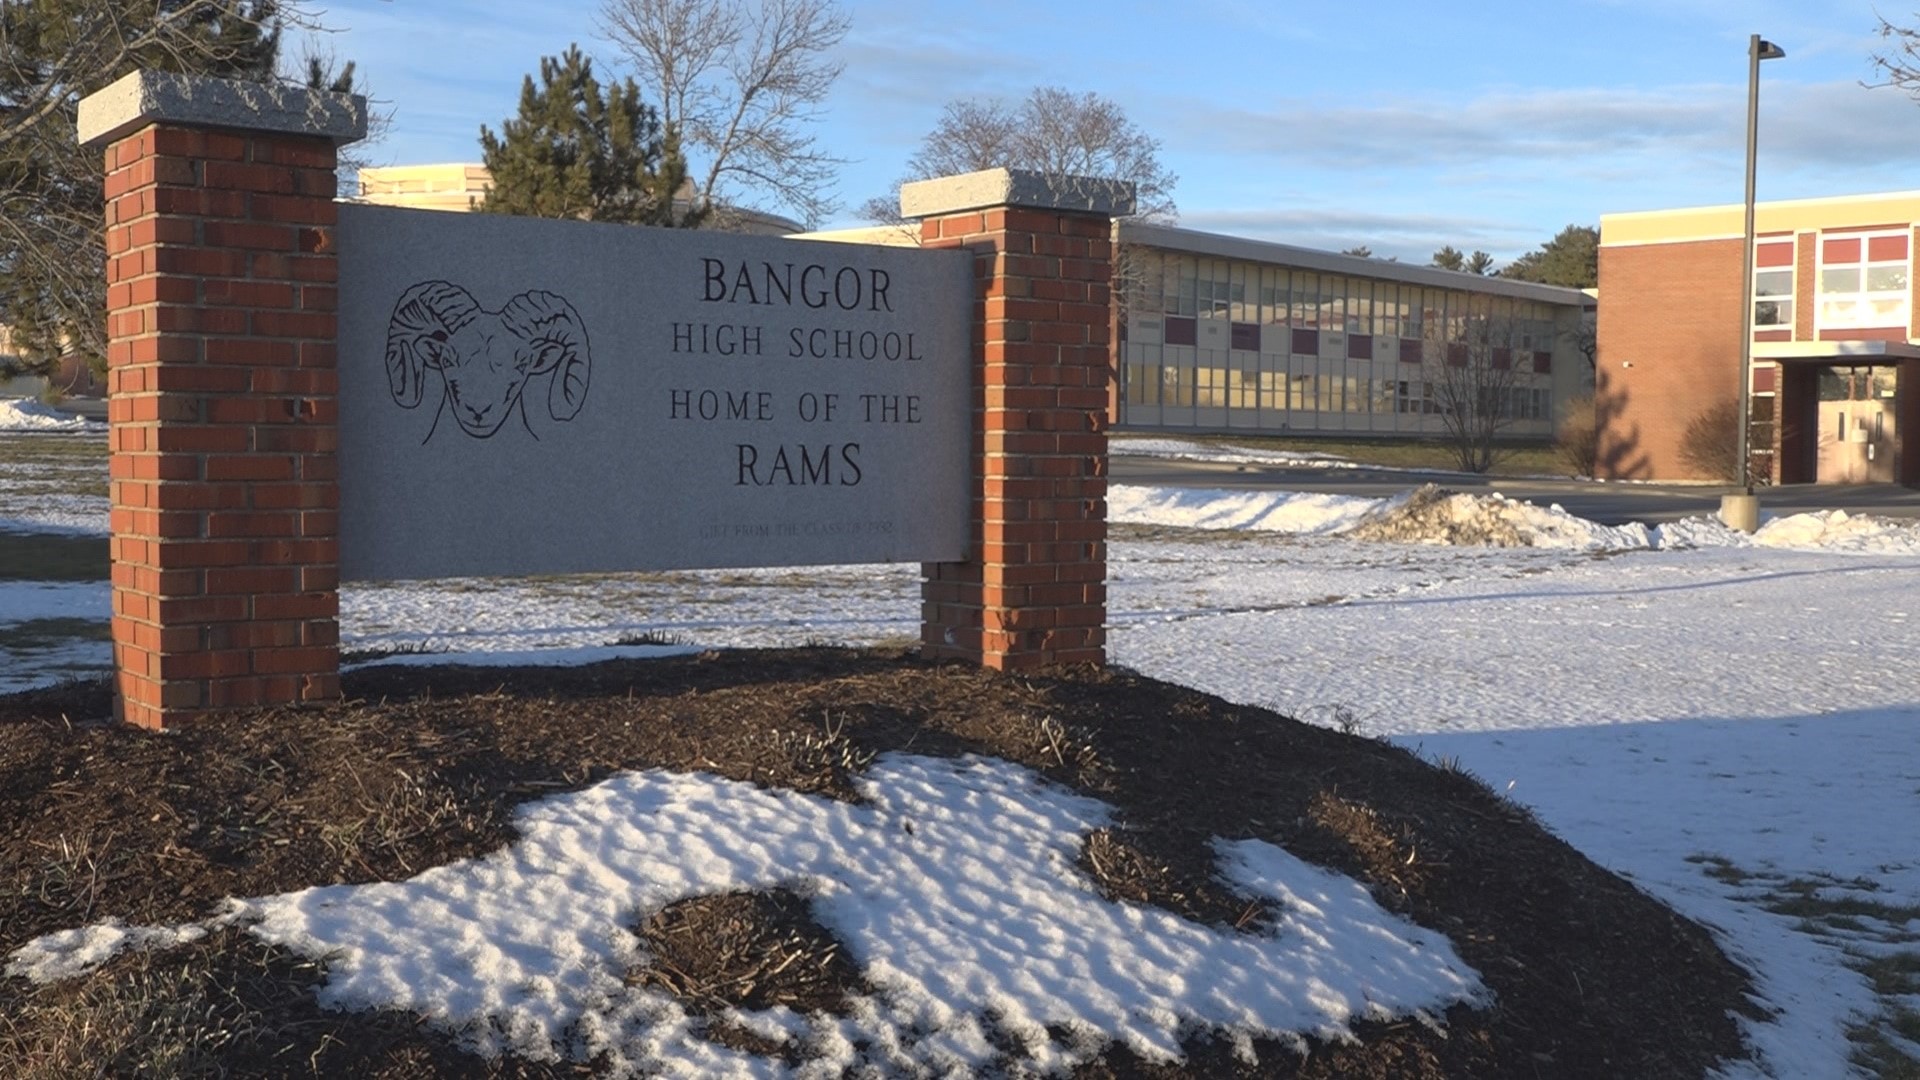 The Bangor School Department released a statement last week, saying it will not live-stream the presidential inauguration because of "threat of potential violence".